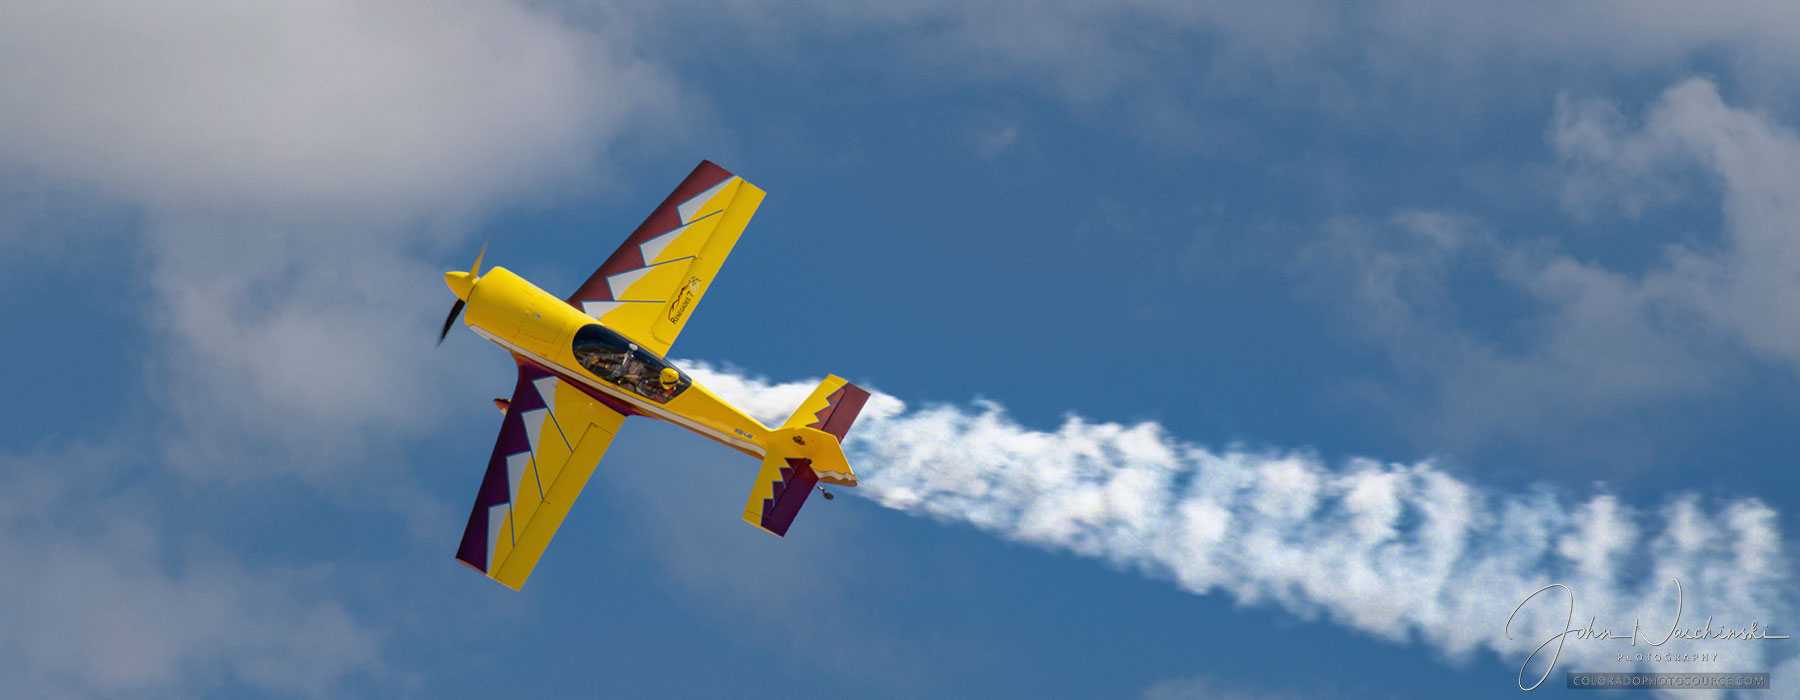 The Rocky Mountain Renegades at Pikes Peak Regional Airshow